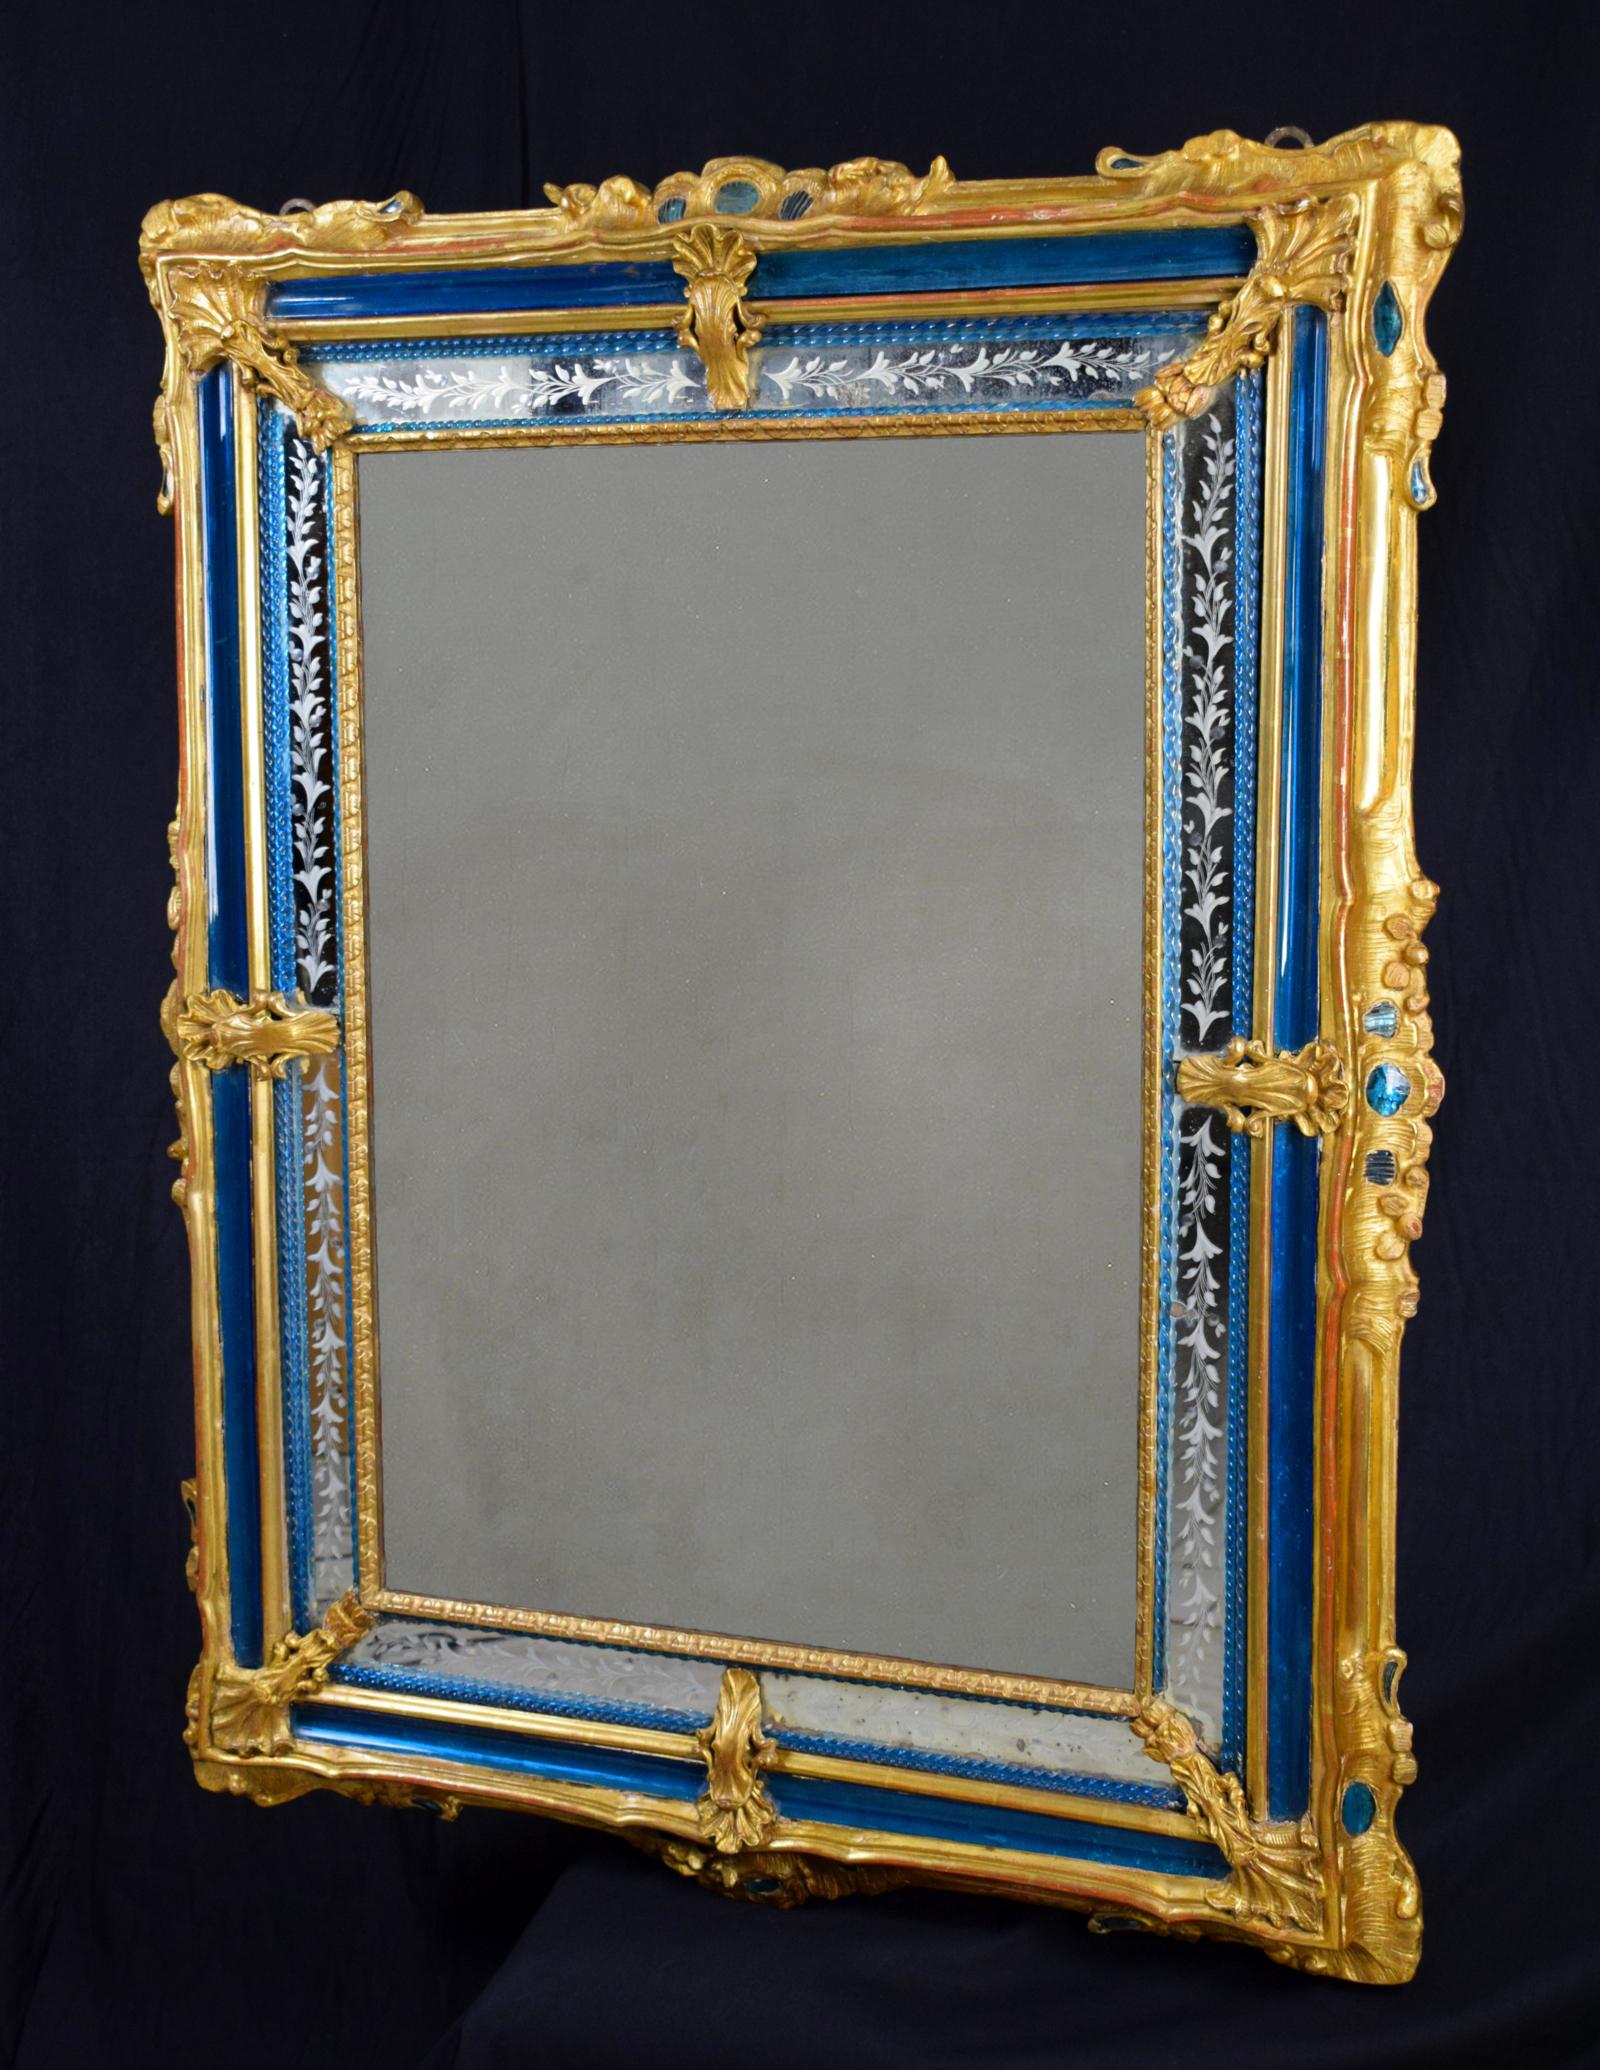 Baroque 18th Century Rectangular Gilded Wood and Blue Glass Paste Venetian Wall Mirror